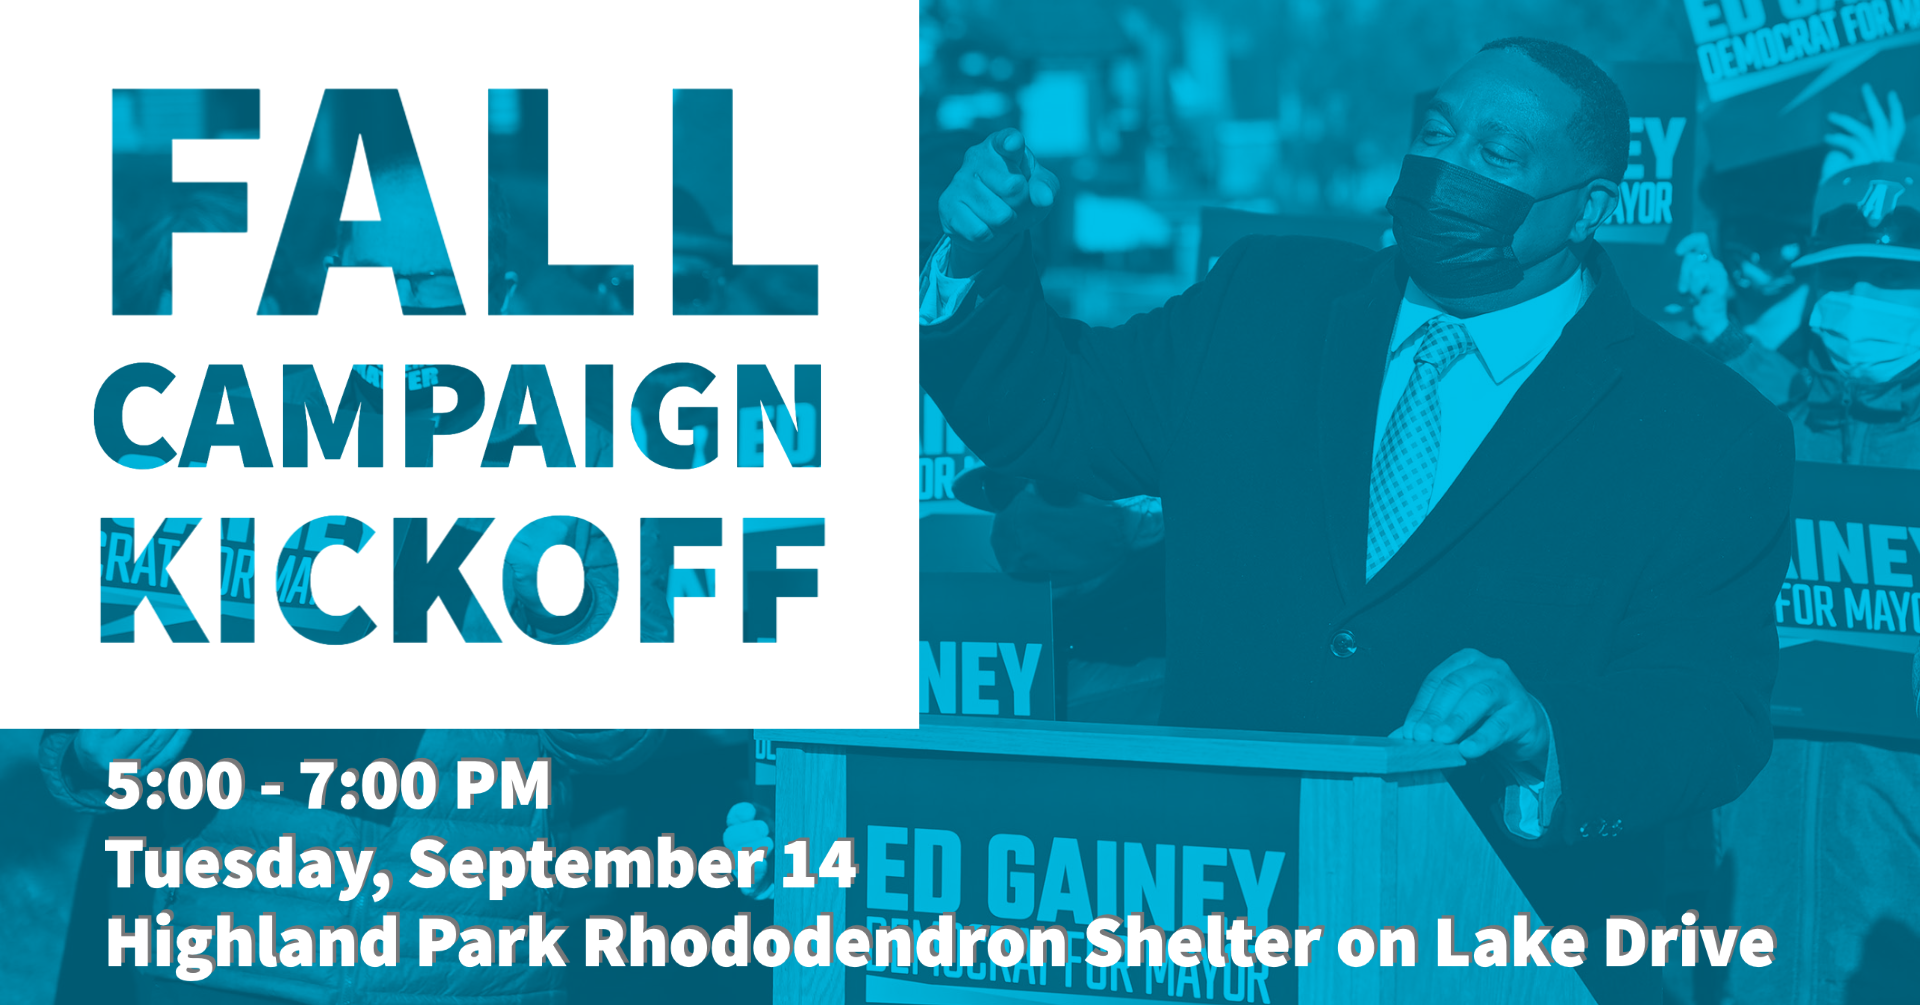 Fall Campaign Kickoff Graphic. Pictured is Ed Gainey rallying with a crowd of supporters under a blue overlay. Text reads 5:00 - 7:00 PM on Tuesday September 14. Join Us at the Highland Park Rhododendron Shelter on Lake Drive